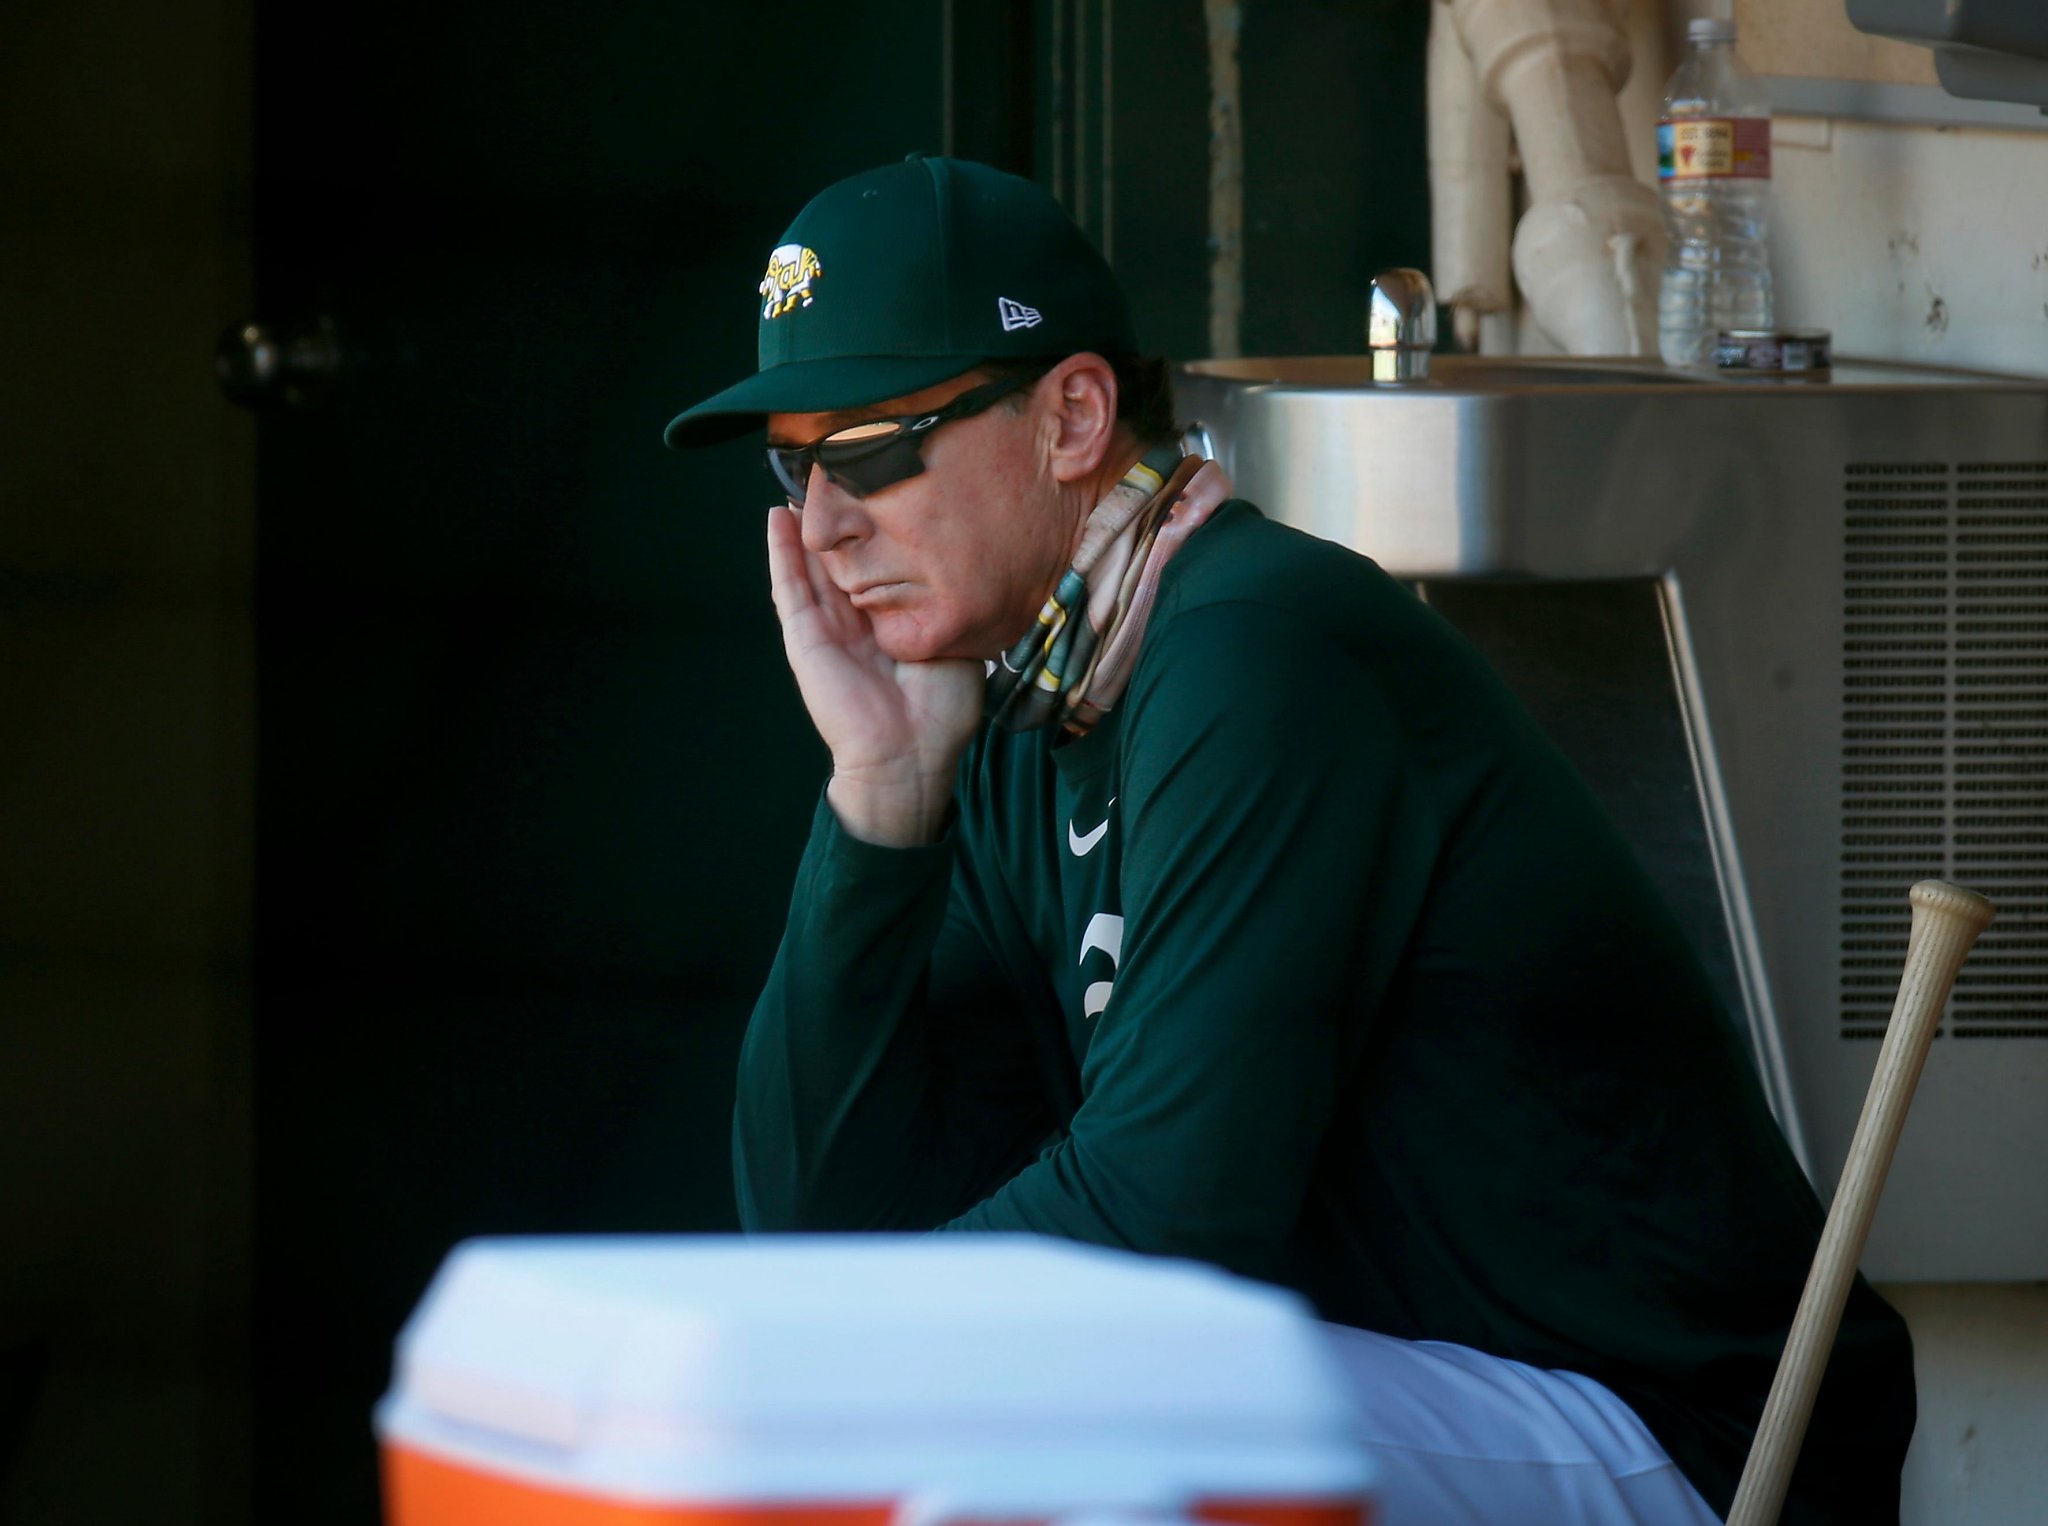 Bob Melvin on possible Billy Beane departure: 'At some point, he's